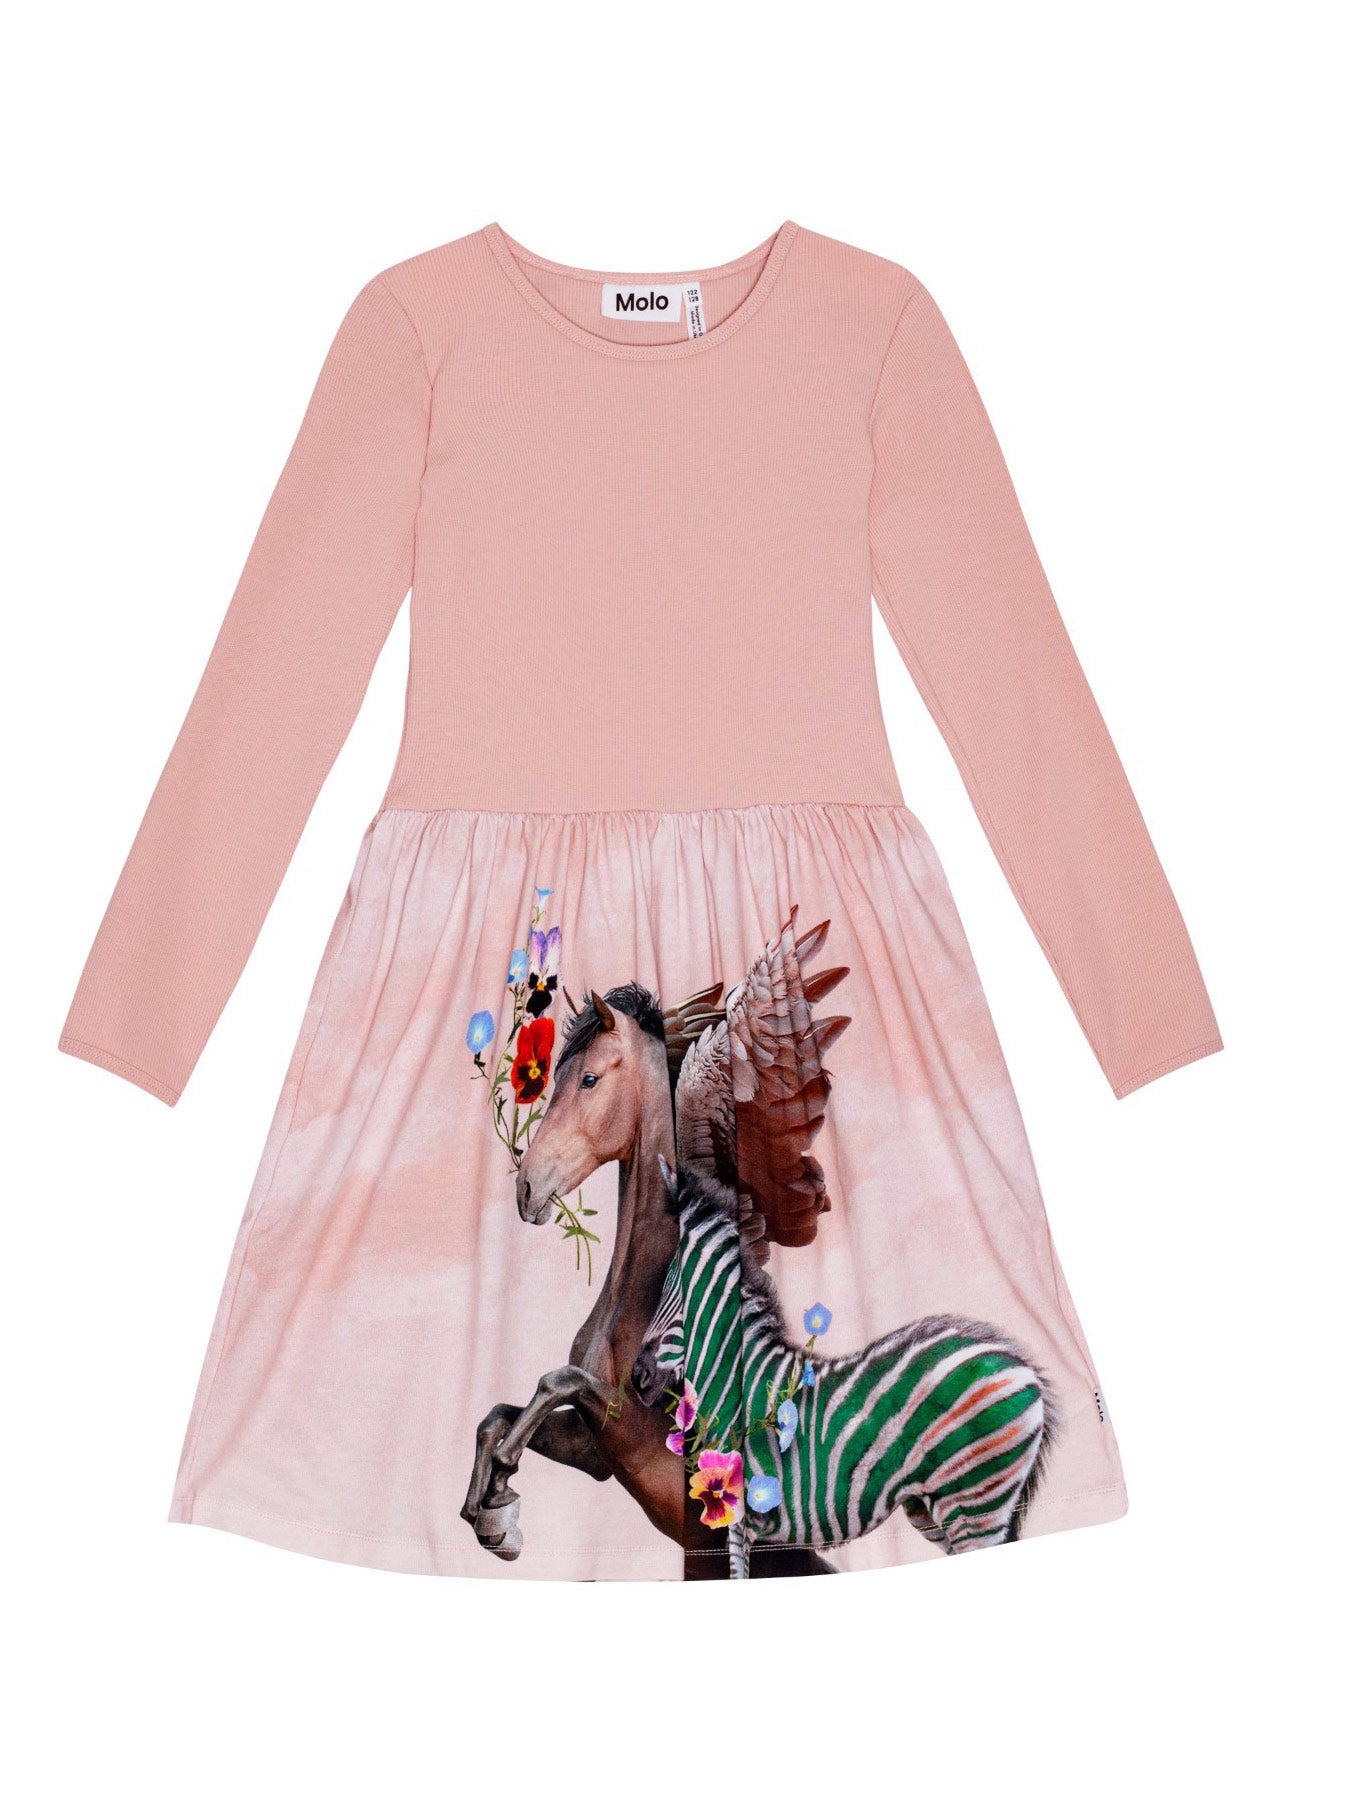 Molo Girls dress with graphic print